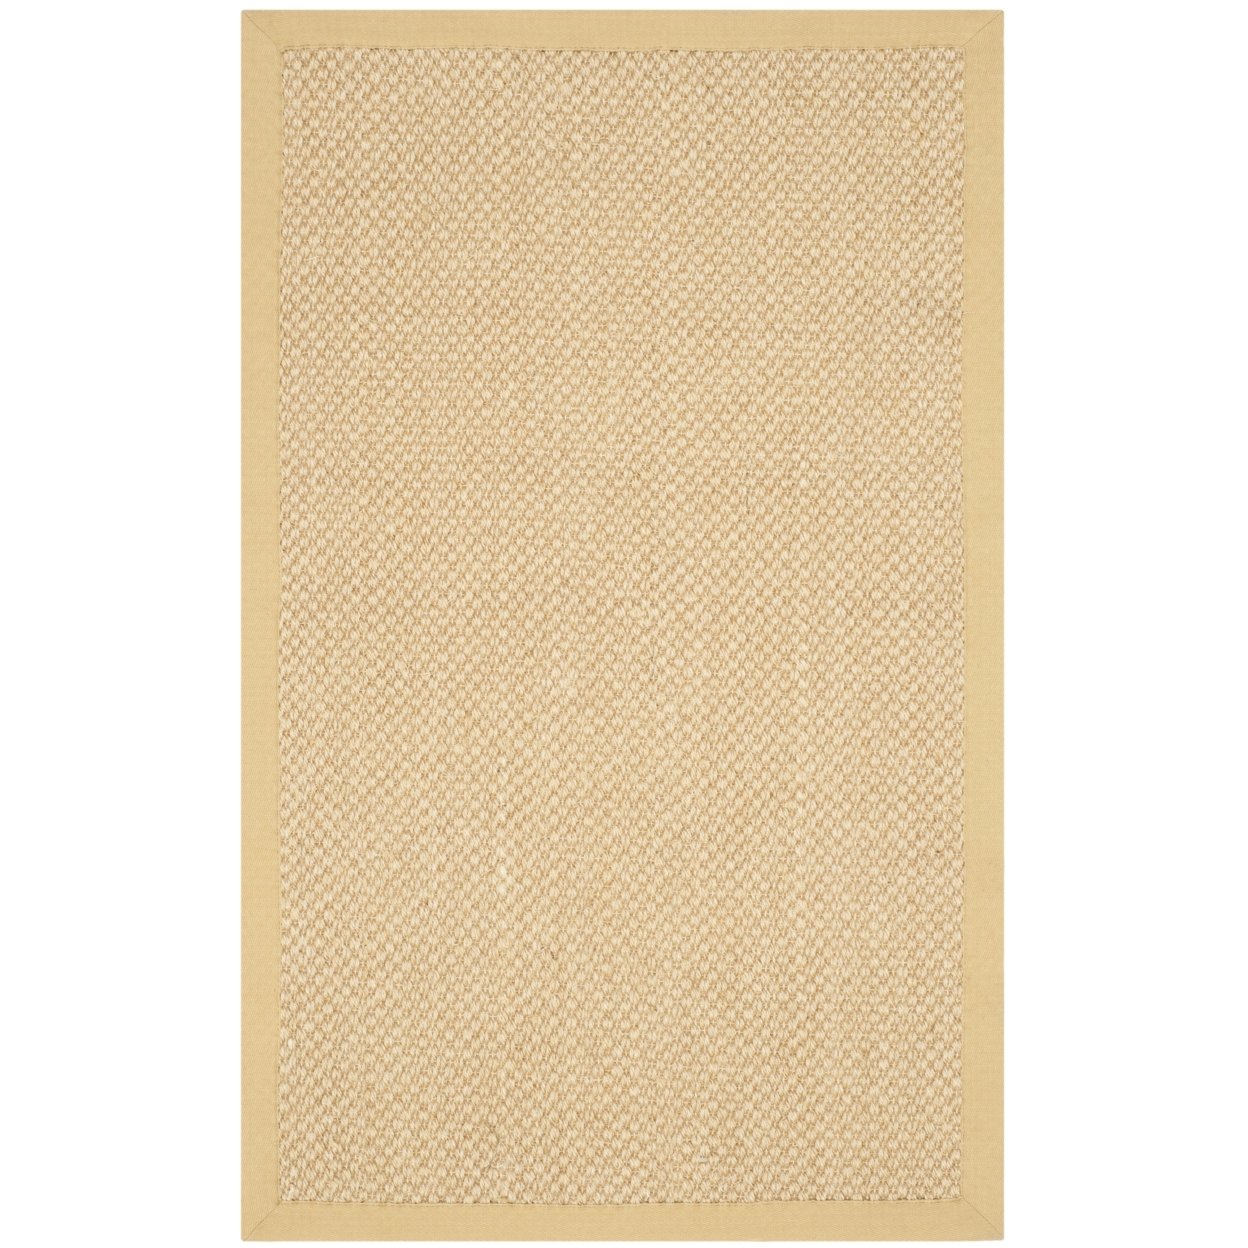 SAFAVIEH Natural Fiber Collection NF443A Maize/Wheat Rug - 2' 6 X 4'